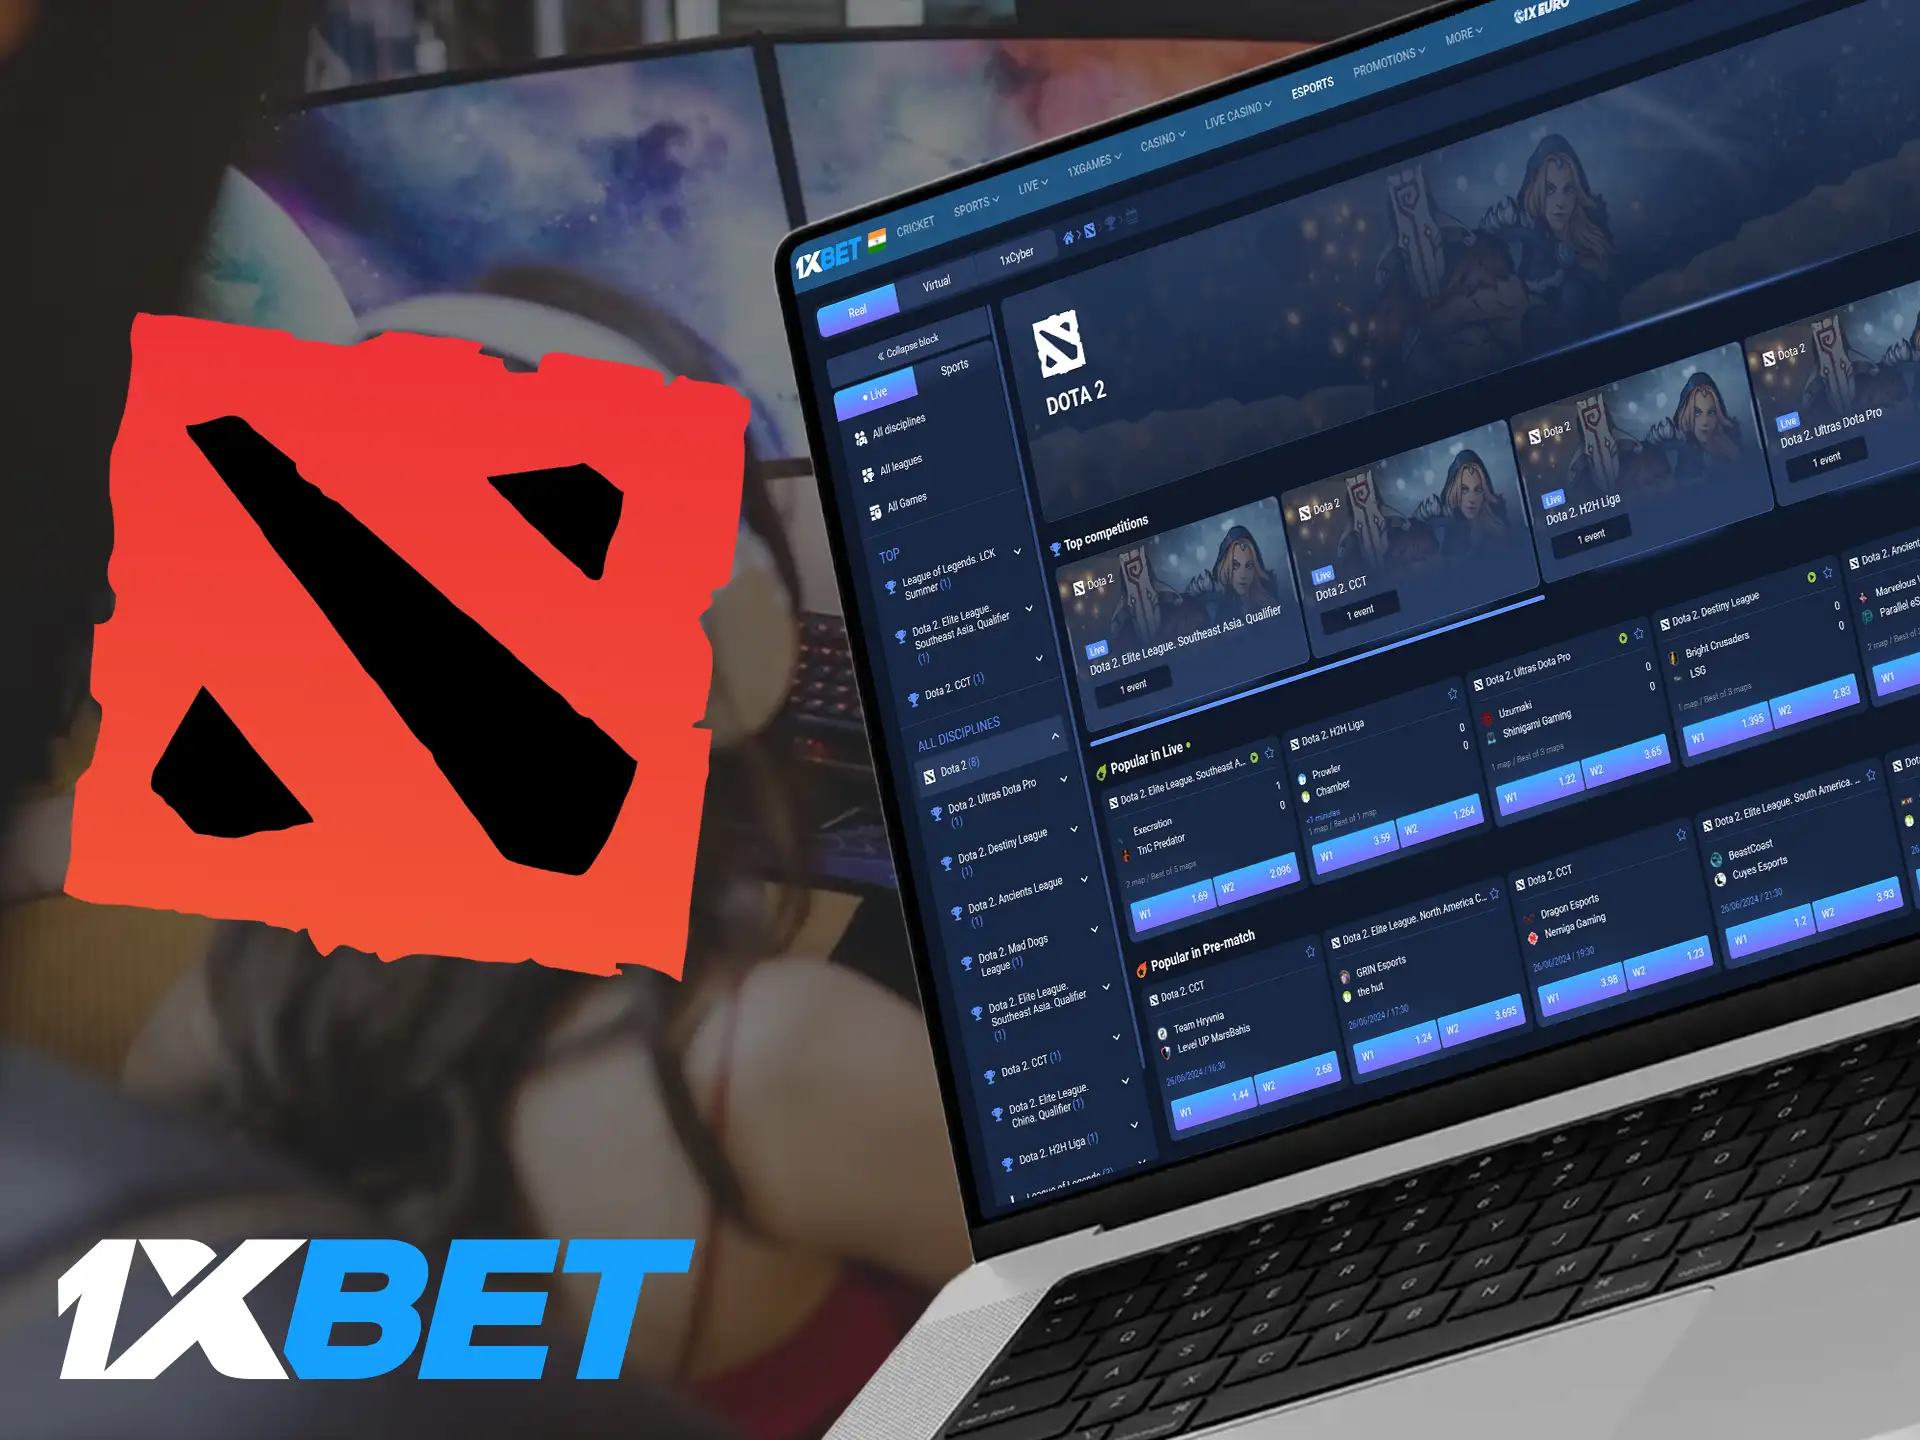 1xBet provides Dota 2 online betting opportunities.